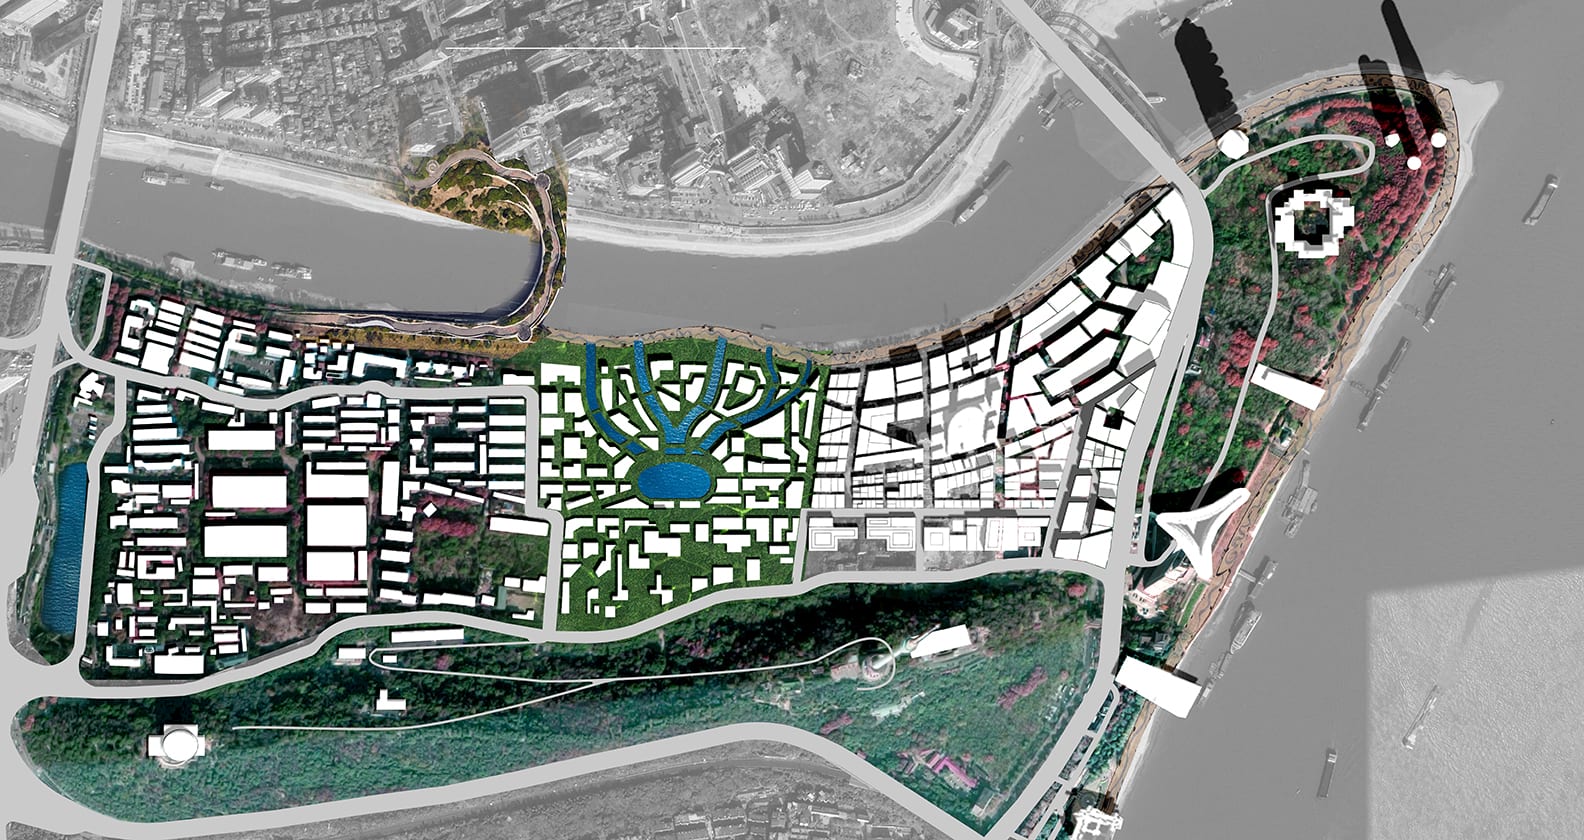 Bird's eye view of the student concept for the proposed site north of Guishan (Turtle Hill) in Wuhan, China.